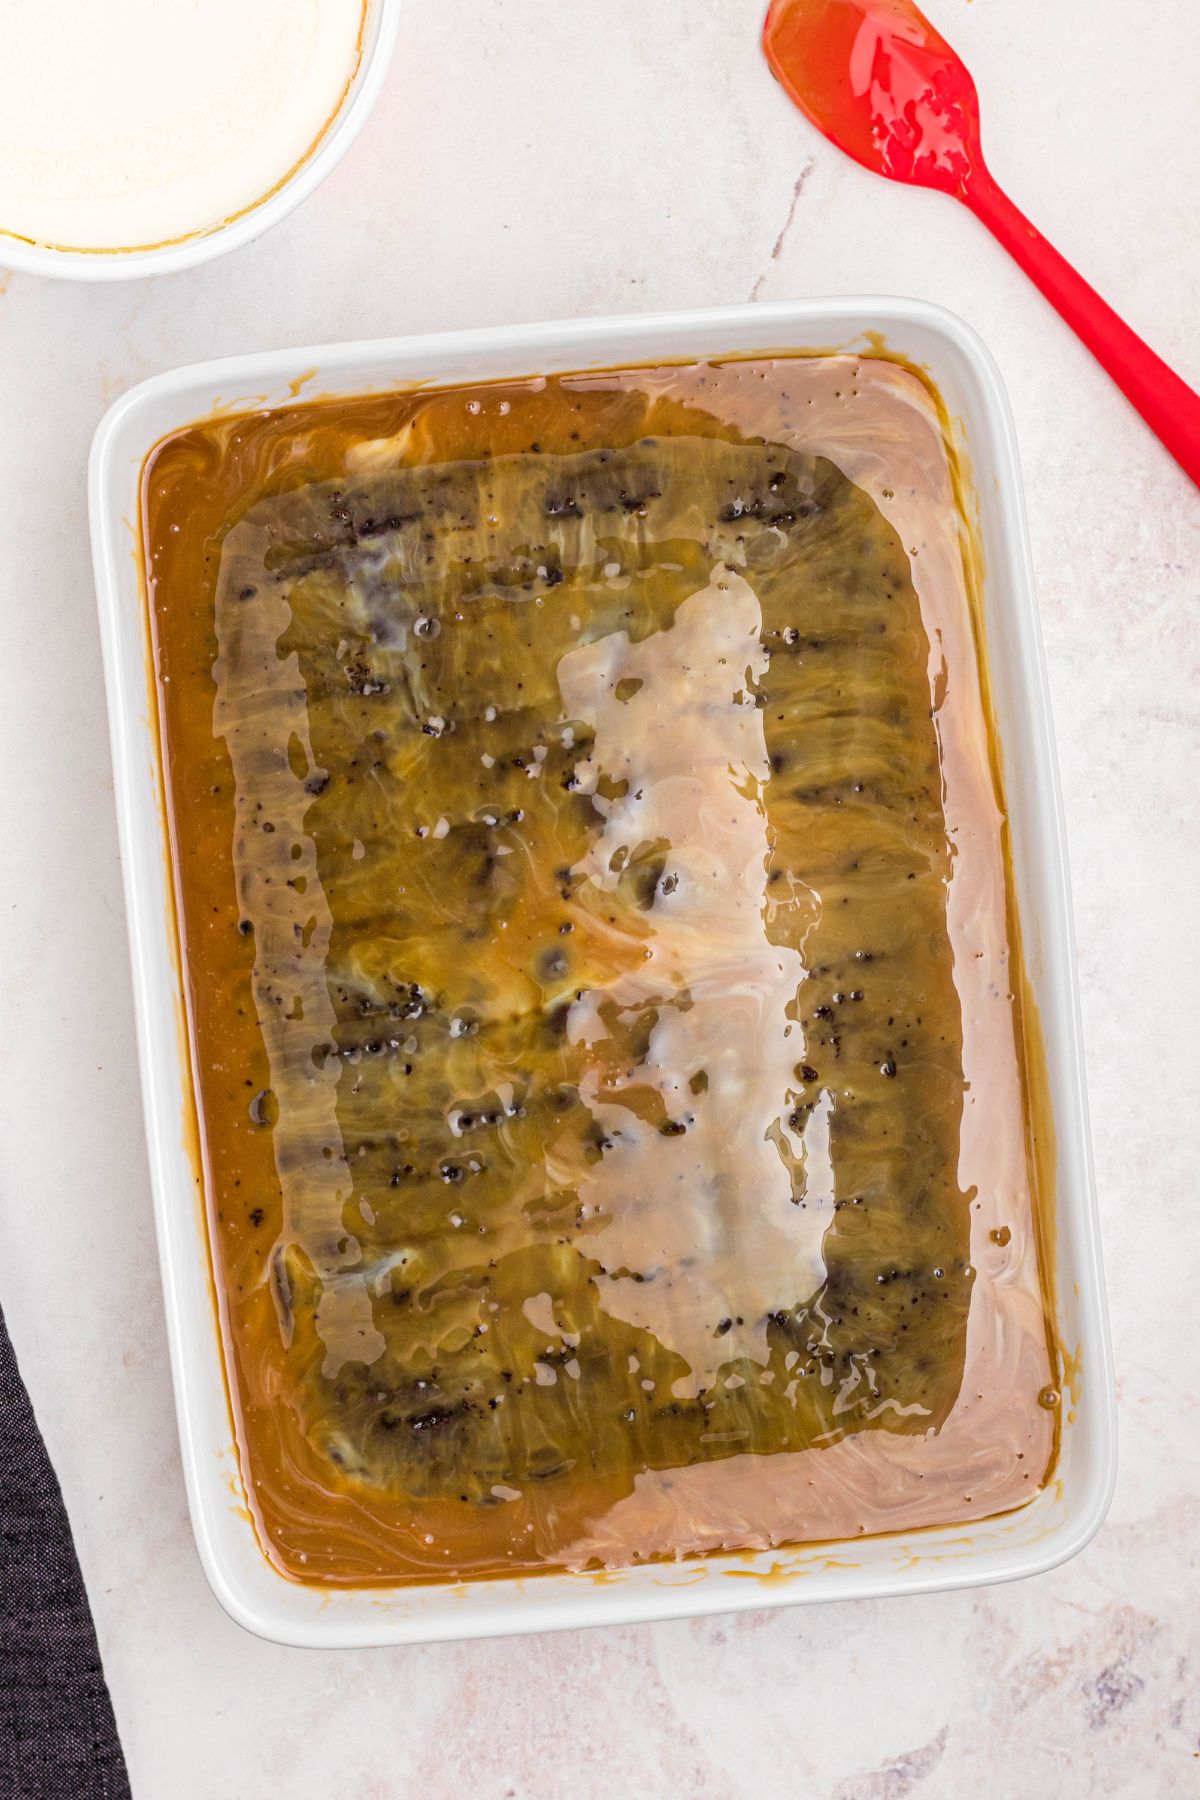 Caramel sauce poured over a baked cake in a rectangle white baking dish.